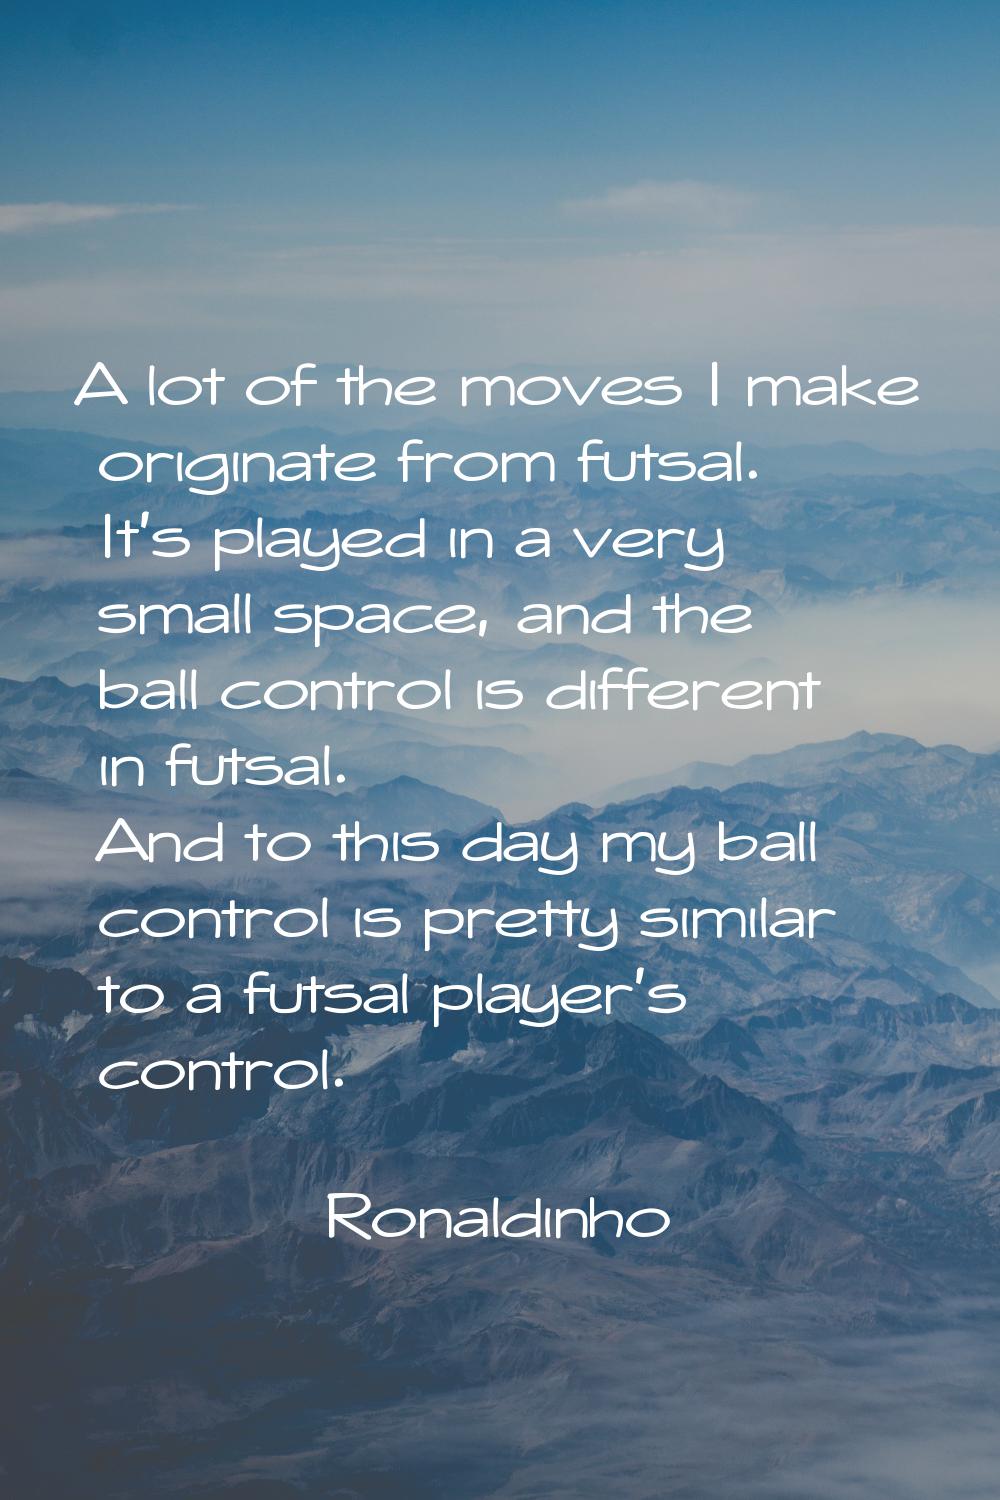 A lot of the moves I make originate from futsal. It's played in a very small space, and the ball co